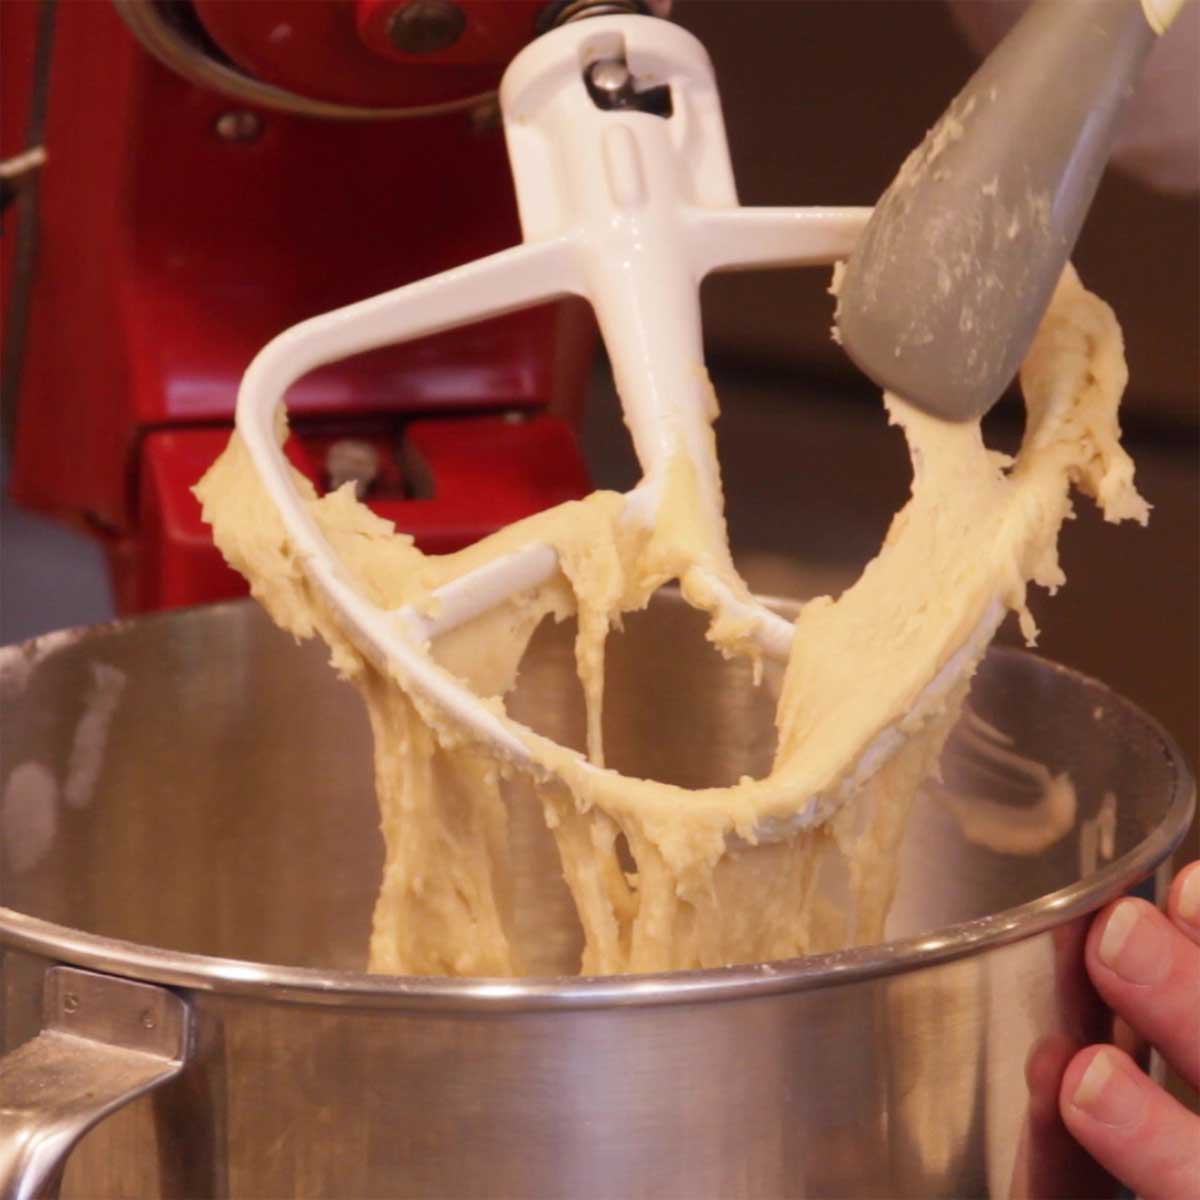 showing dough on the mixing paddle that is too sticky